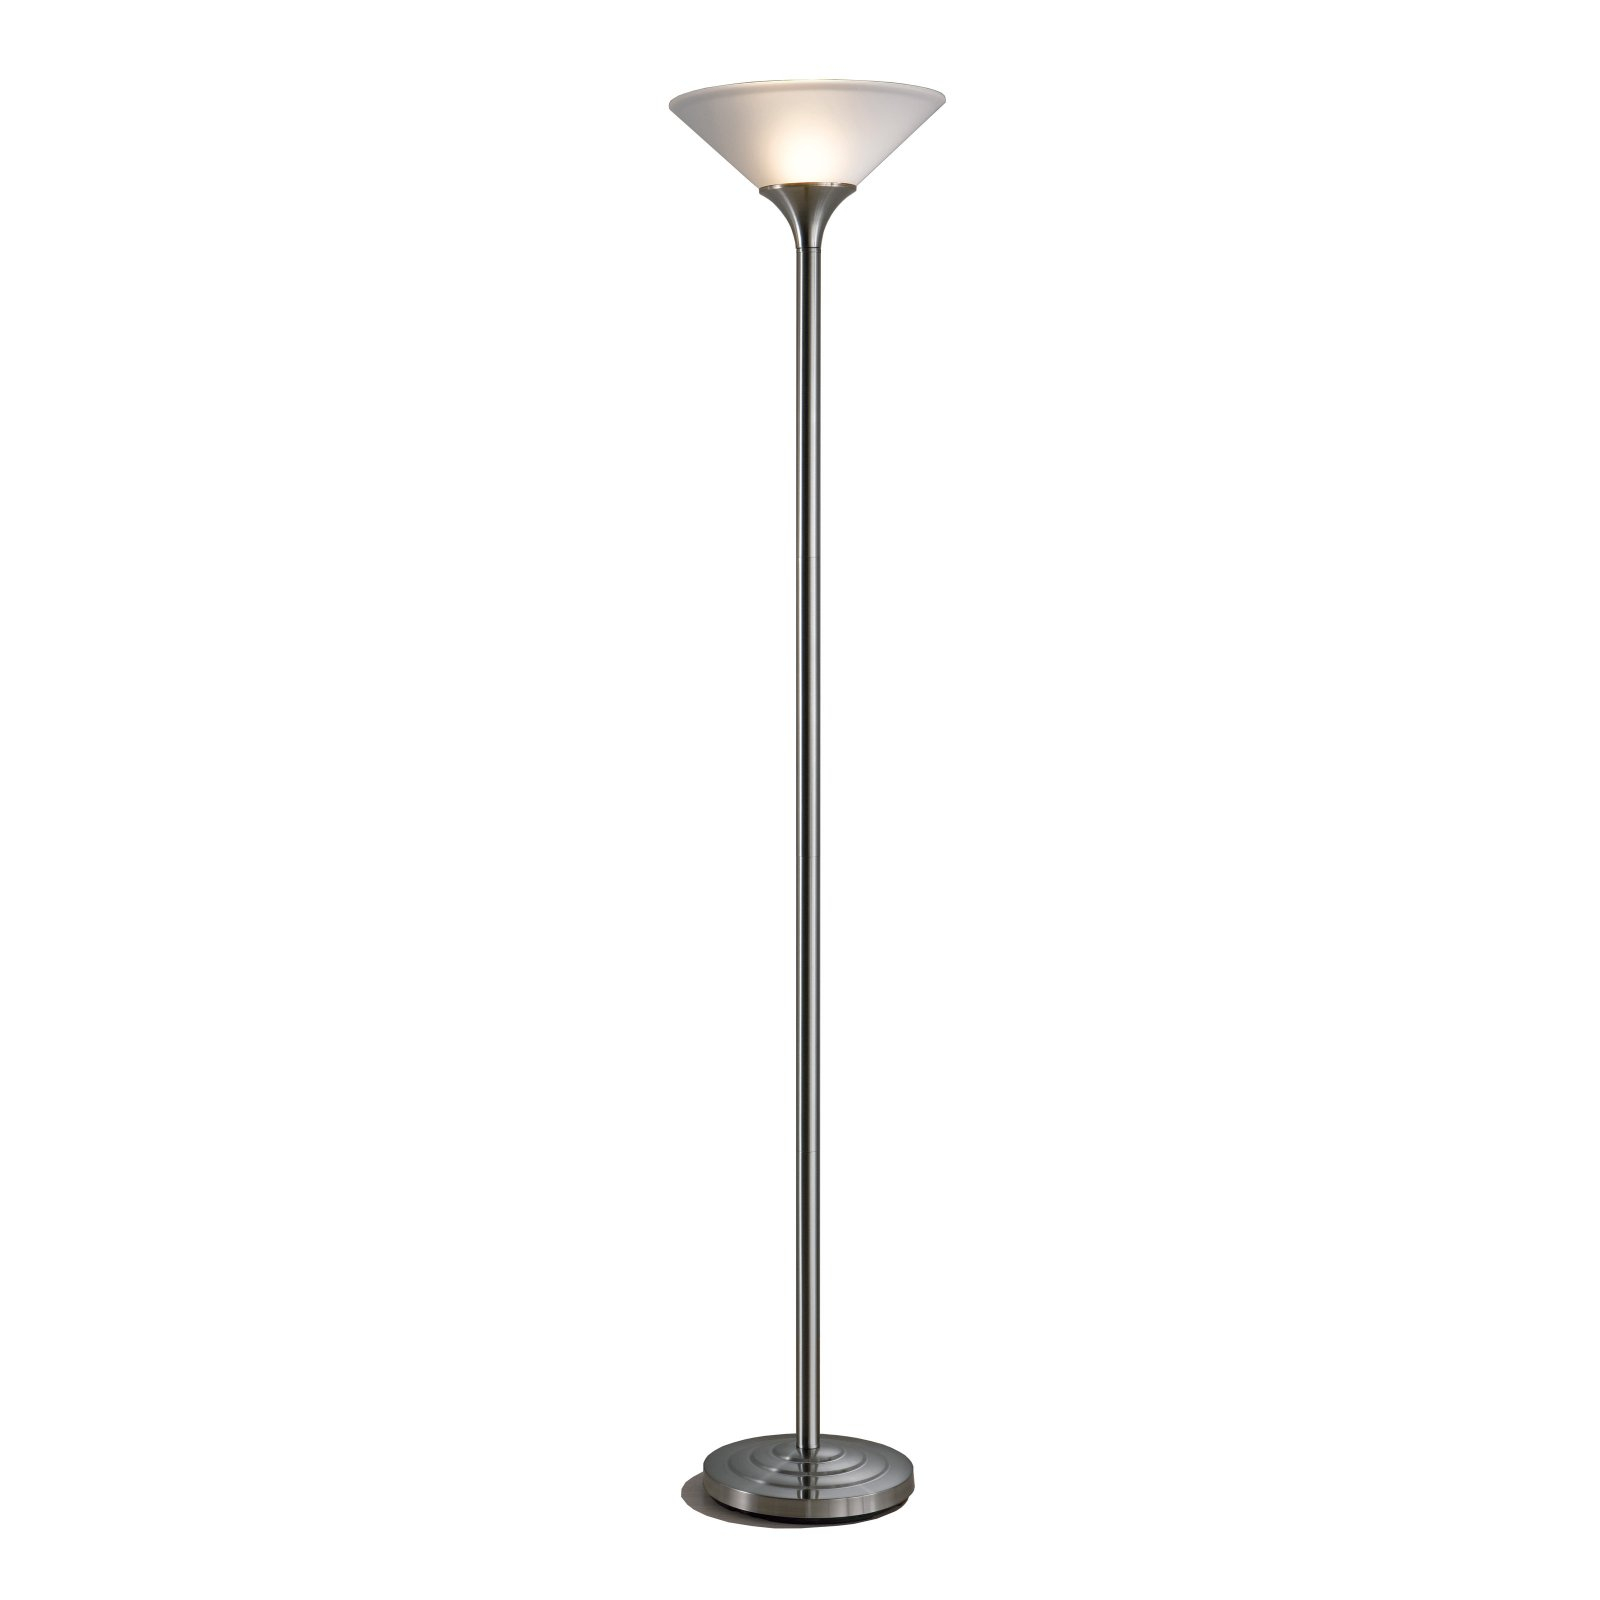 Normande Lighting Brushed Steel Torchiere Floor Lamp Walmart within sizing 1600 X 1600